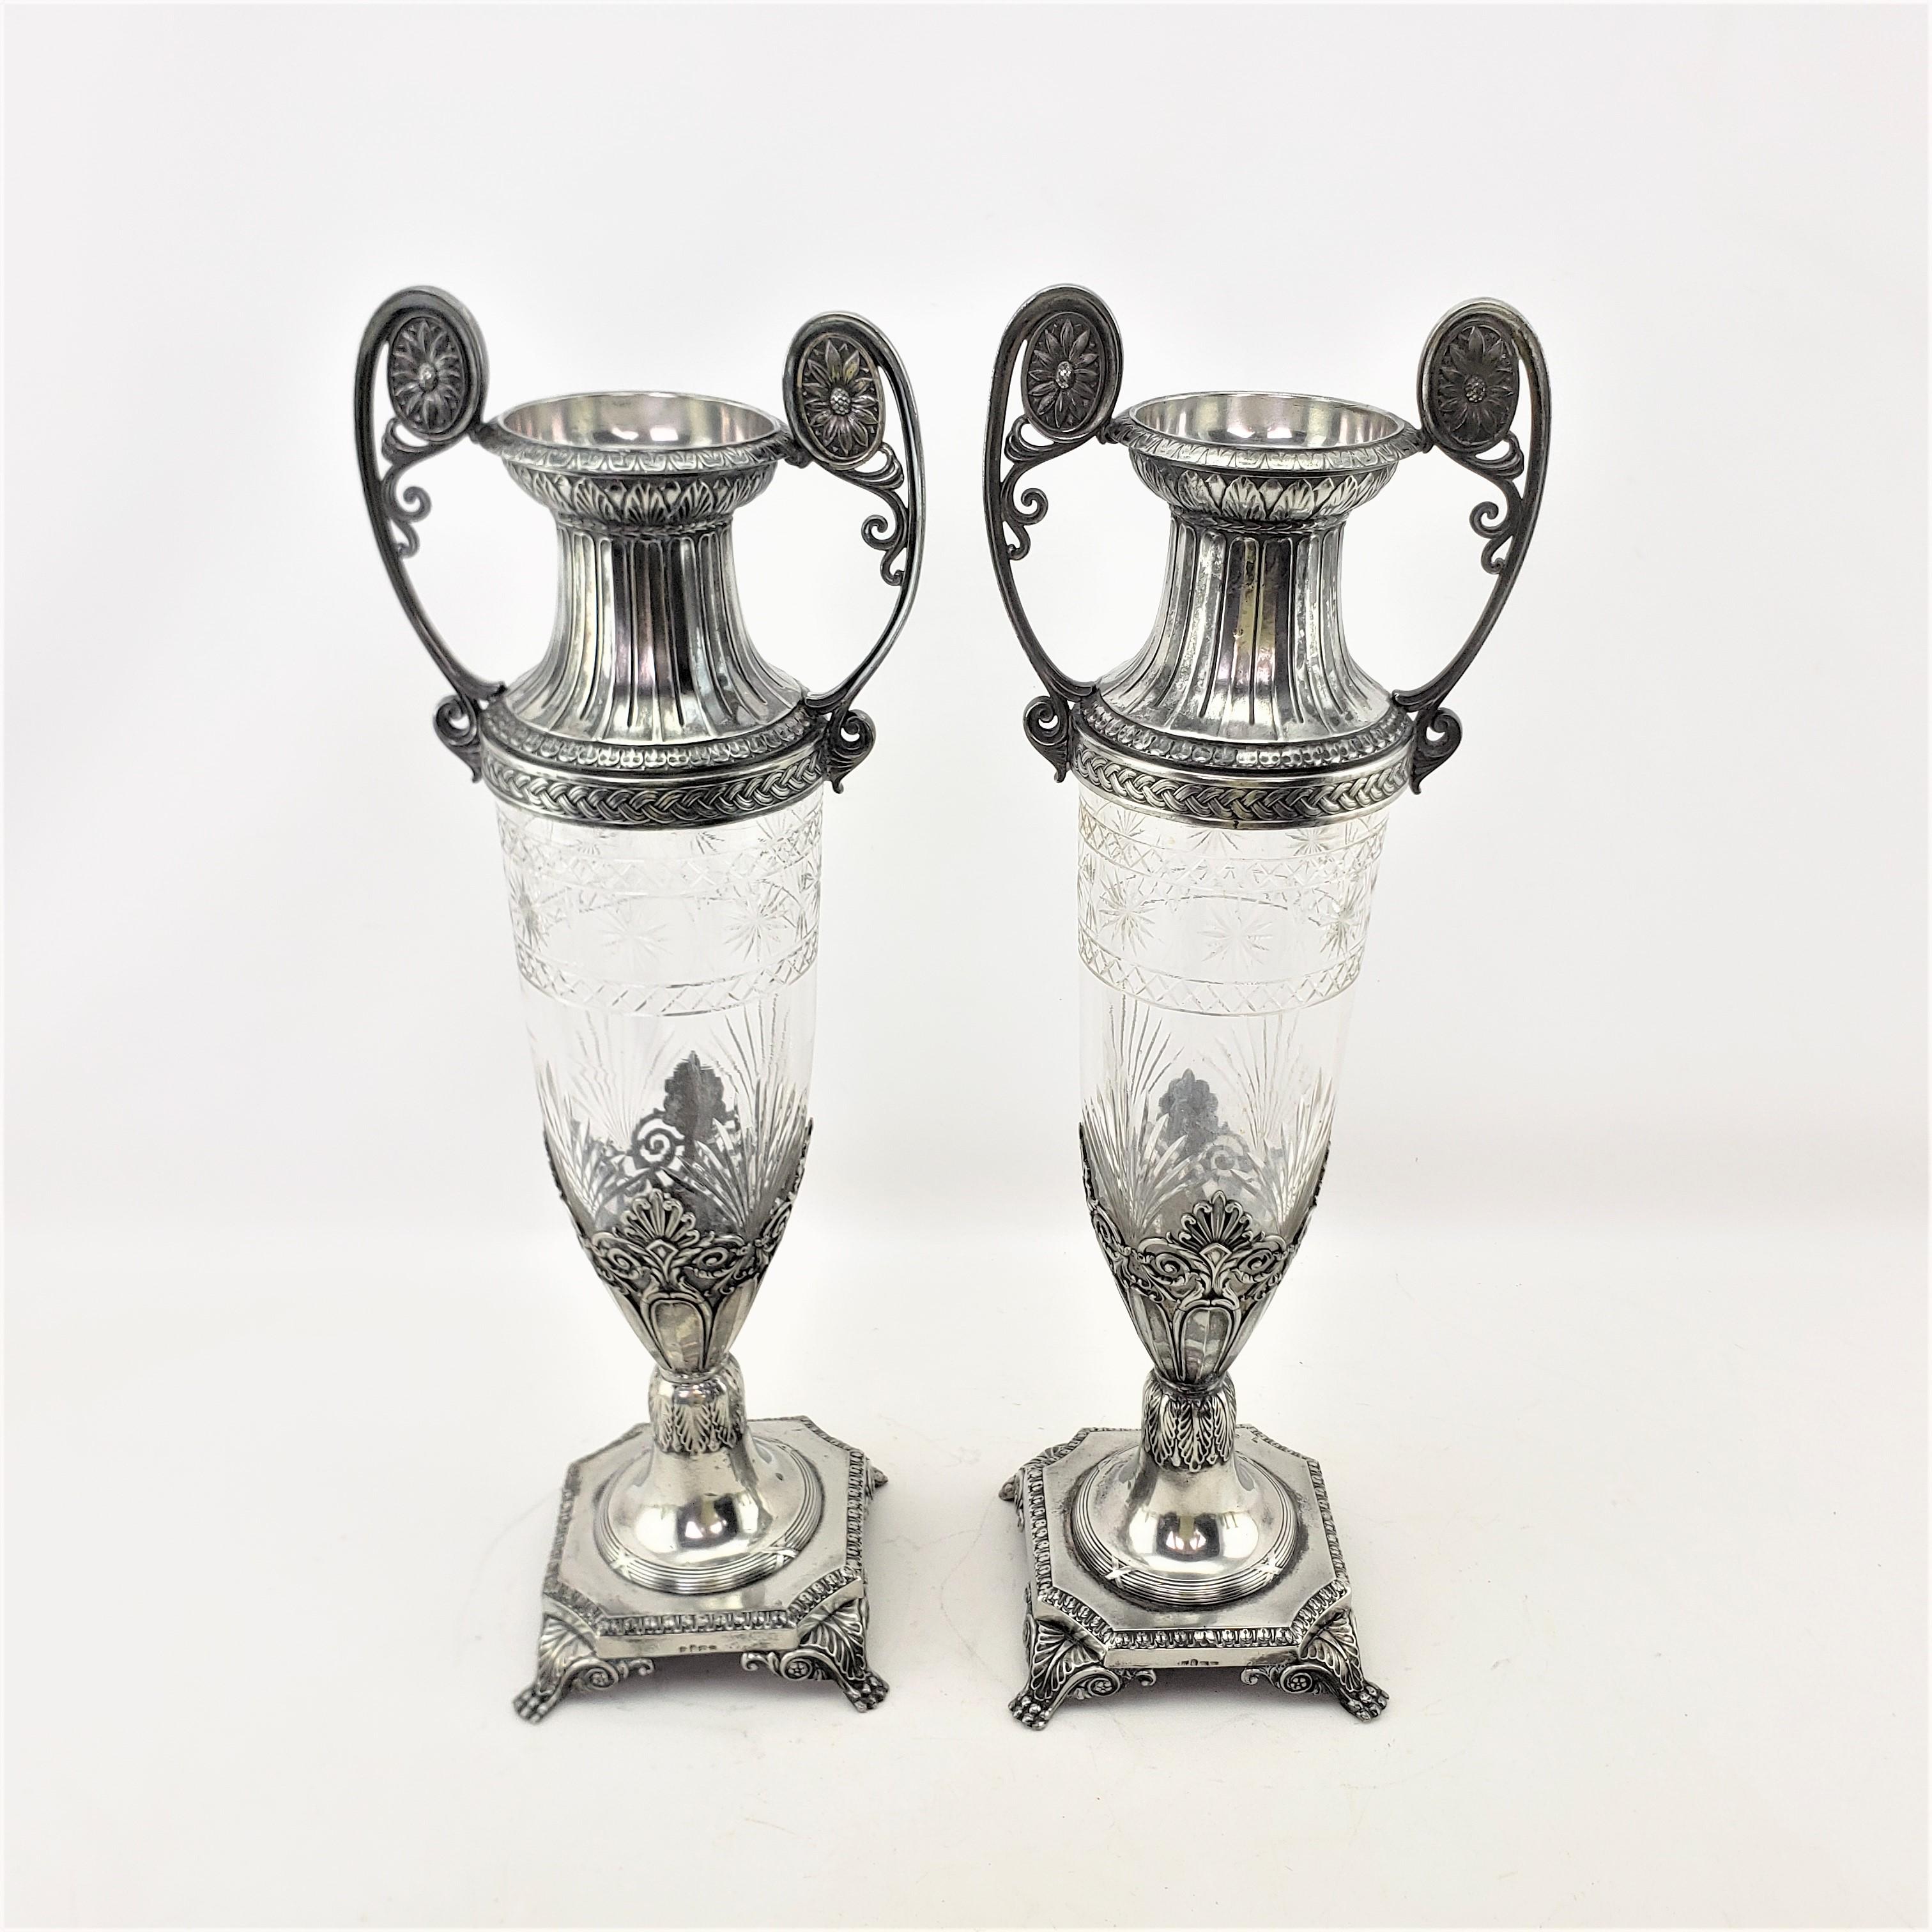 Pair of Antique WMF Cut Crystal with Silver Plated Mounts Seccessionist Vases In Good Condition For Sale In Hamilton, Ontario